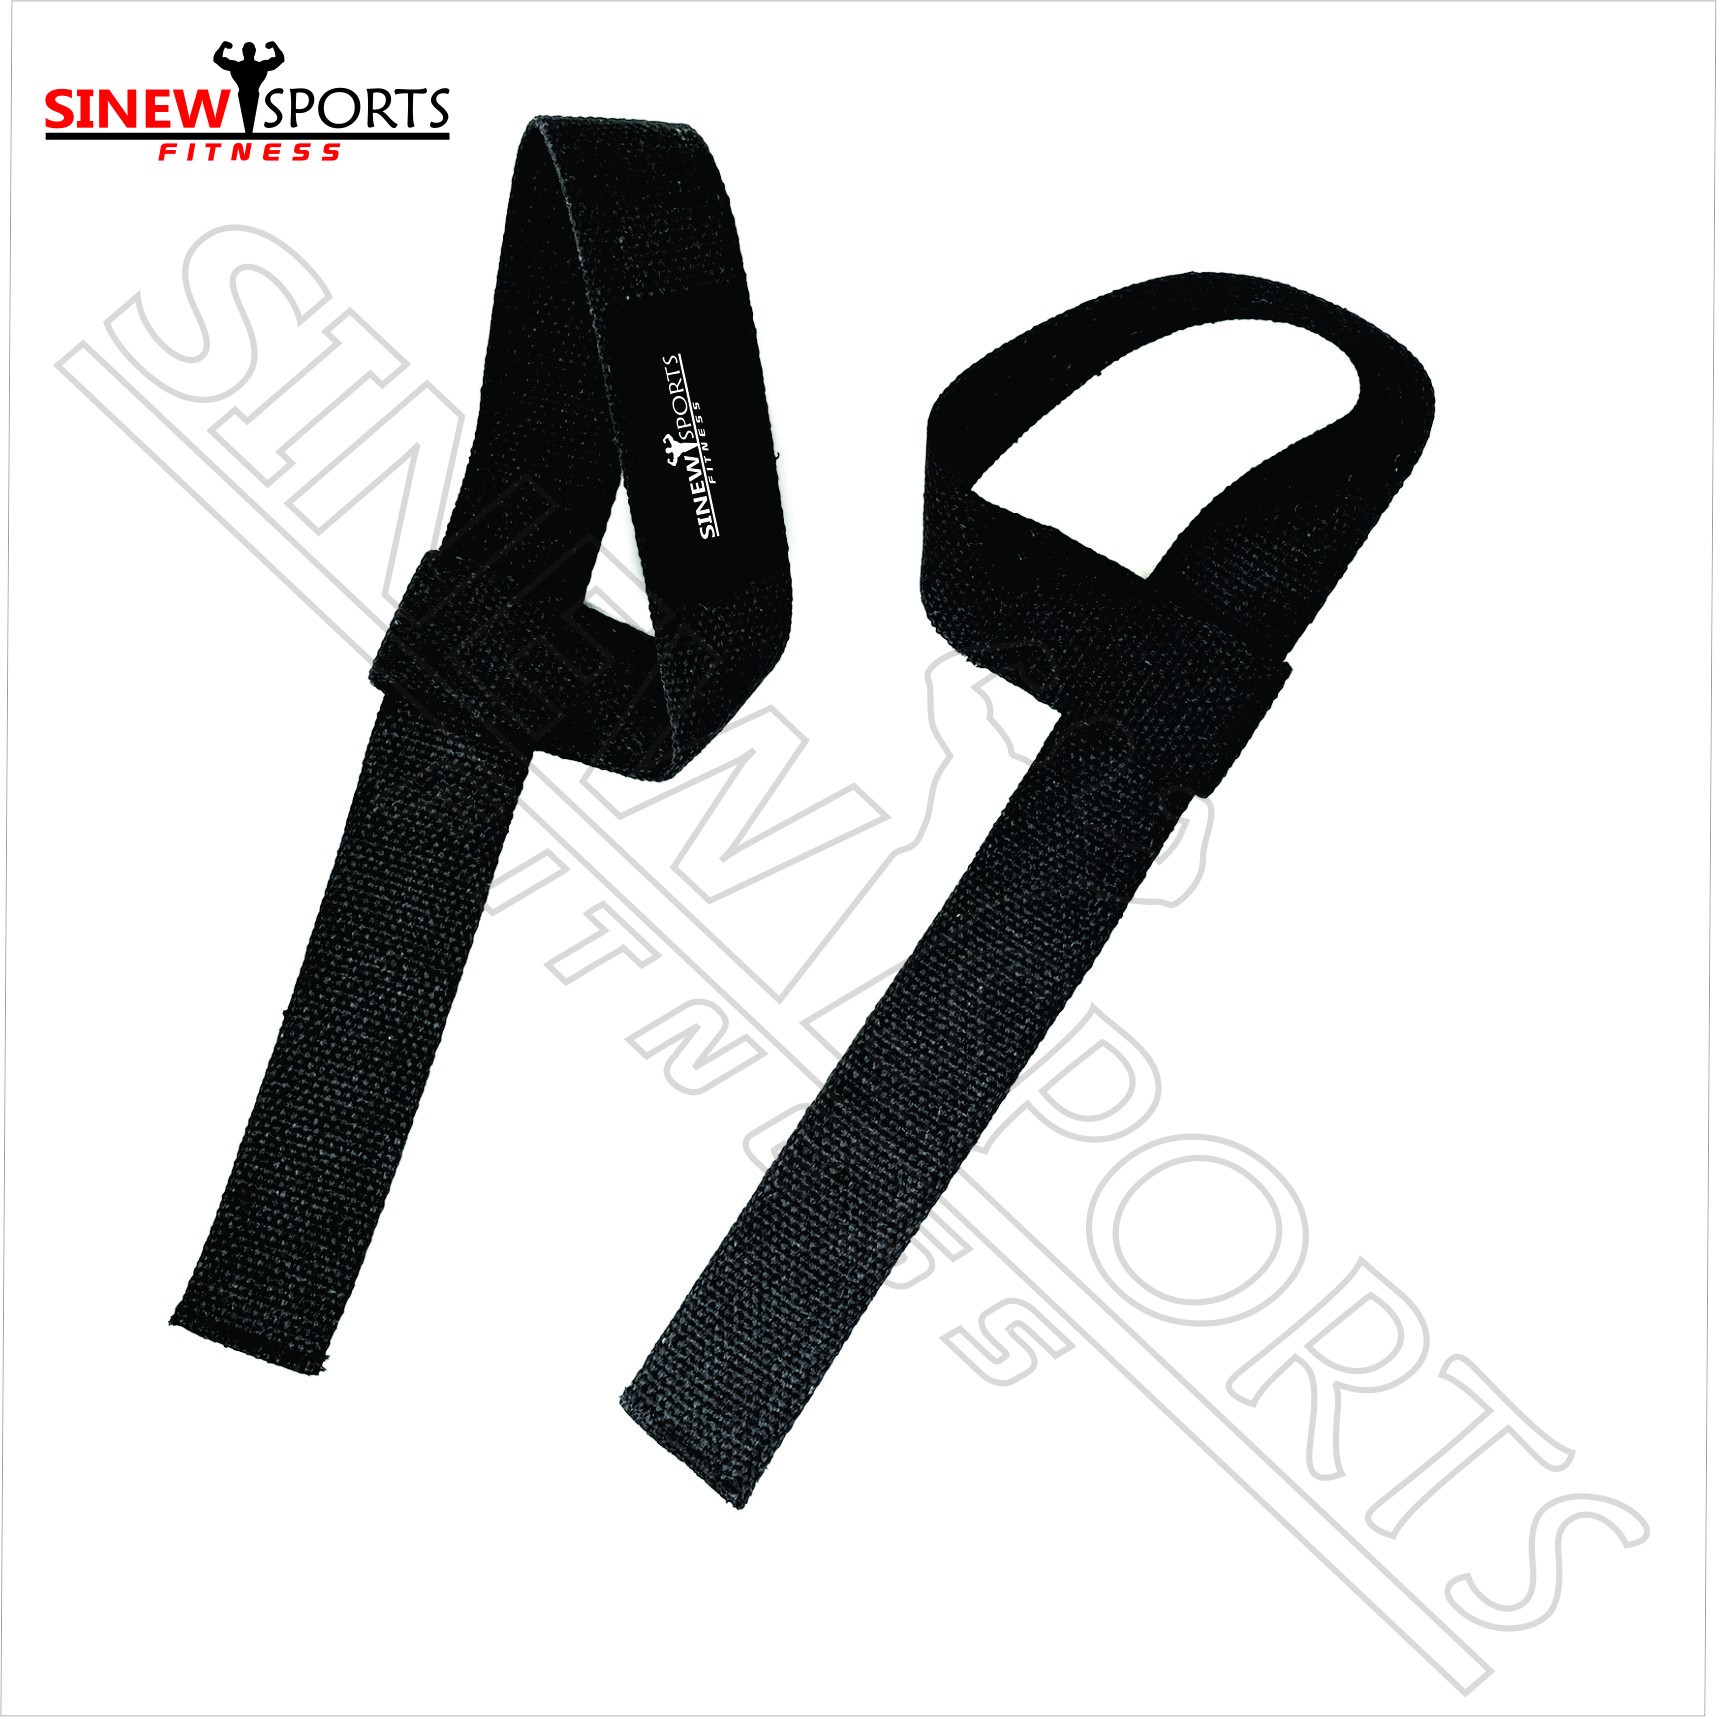 High Quality Custom Made Weightlifting Gym Lifting Wrist Straps For Strength Training Weigh For Strength Training Weight Lifting